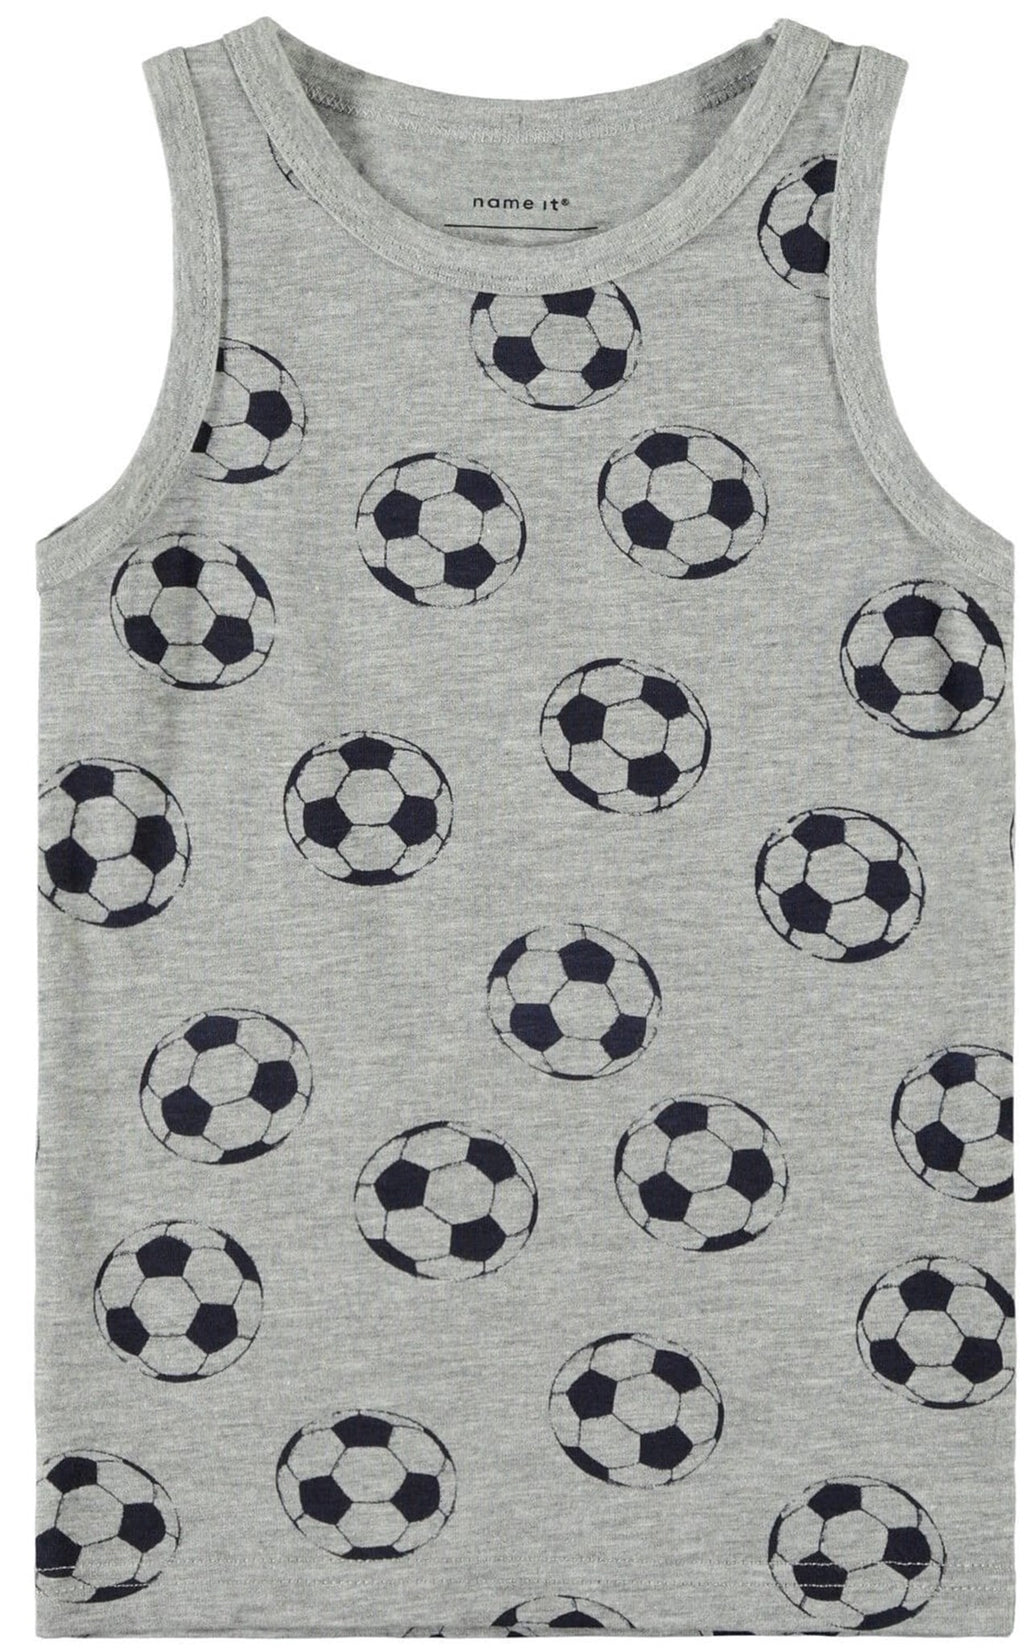 2-pack vests - Grey and navy